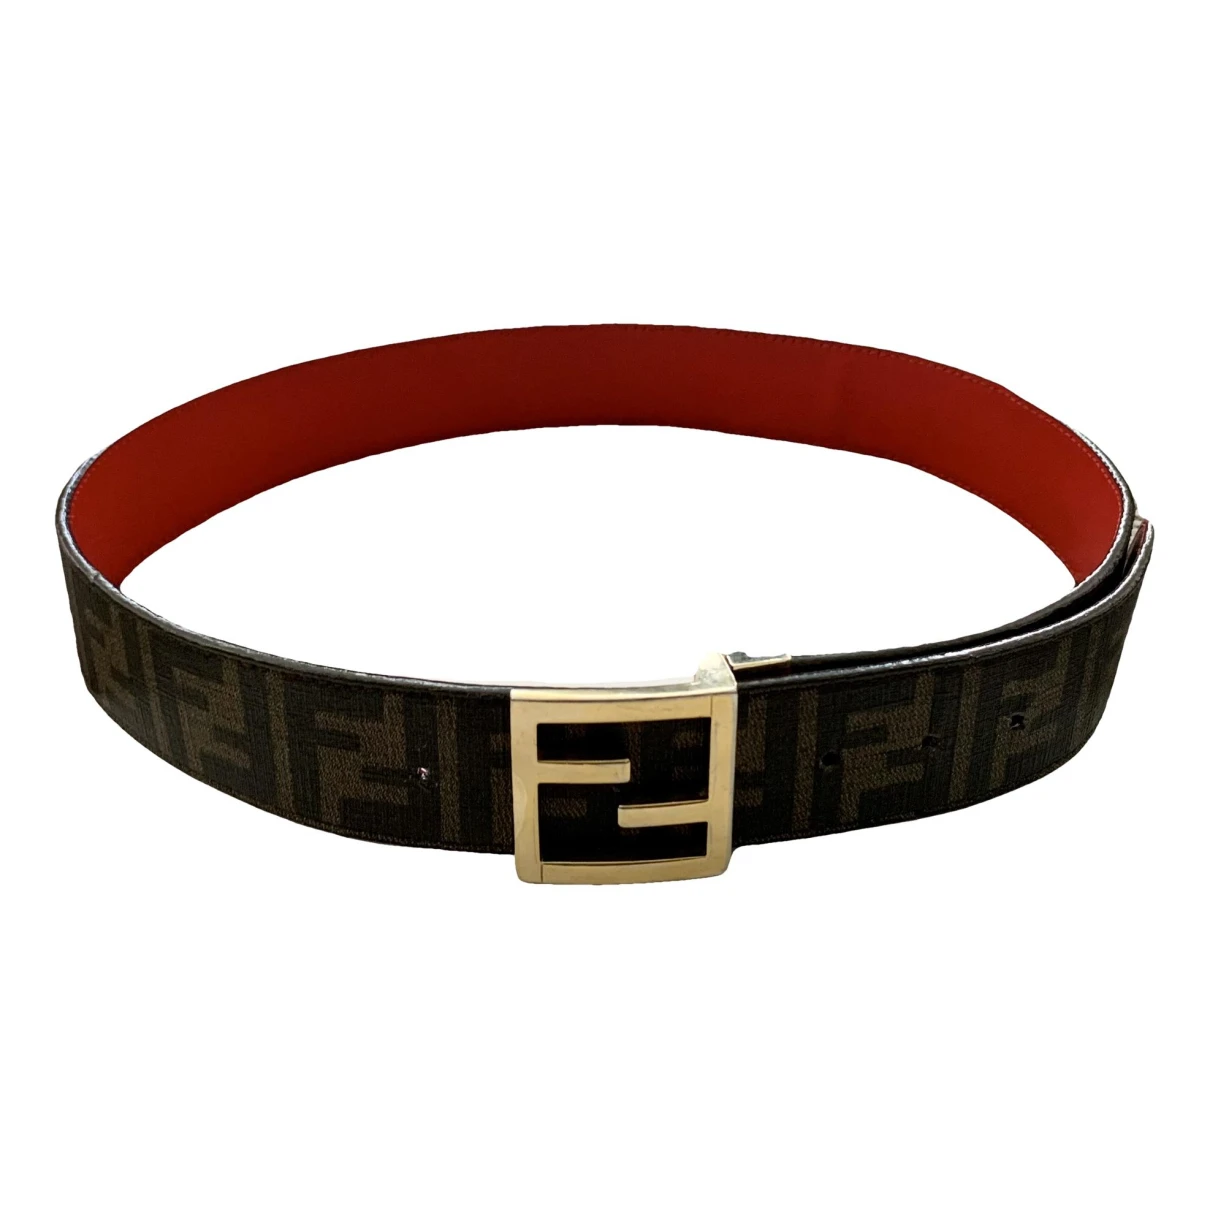 accessories Fendi belts for Female Leather 90 cm. Used condition